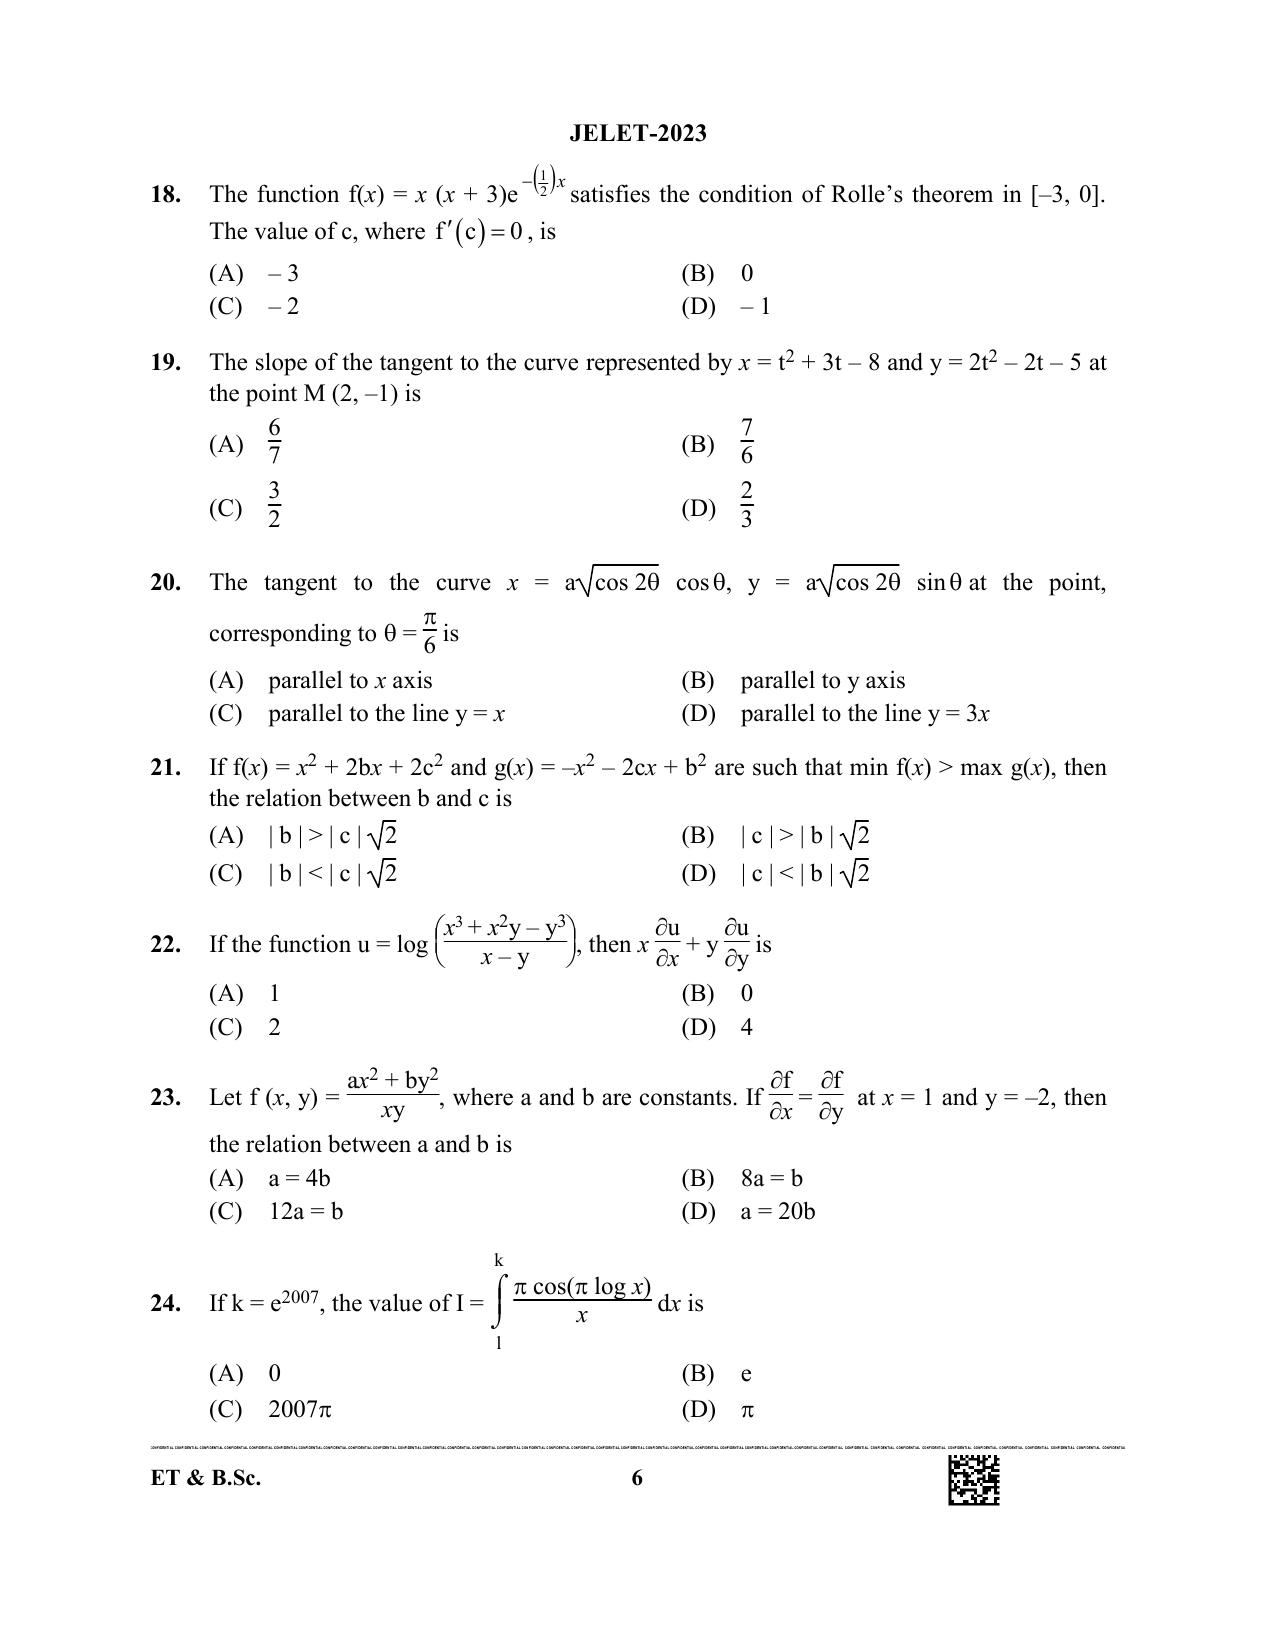 WBJEE JELET 2023 Paper I (ET & BSC) Question Papers - Page 6